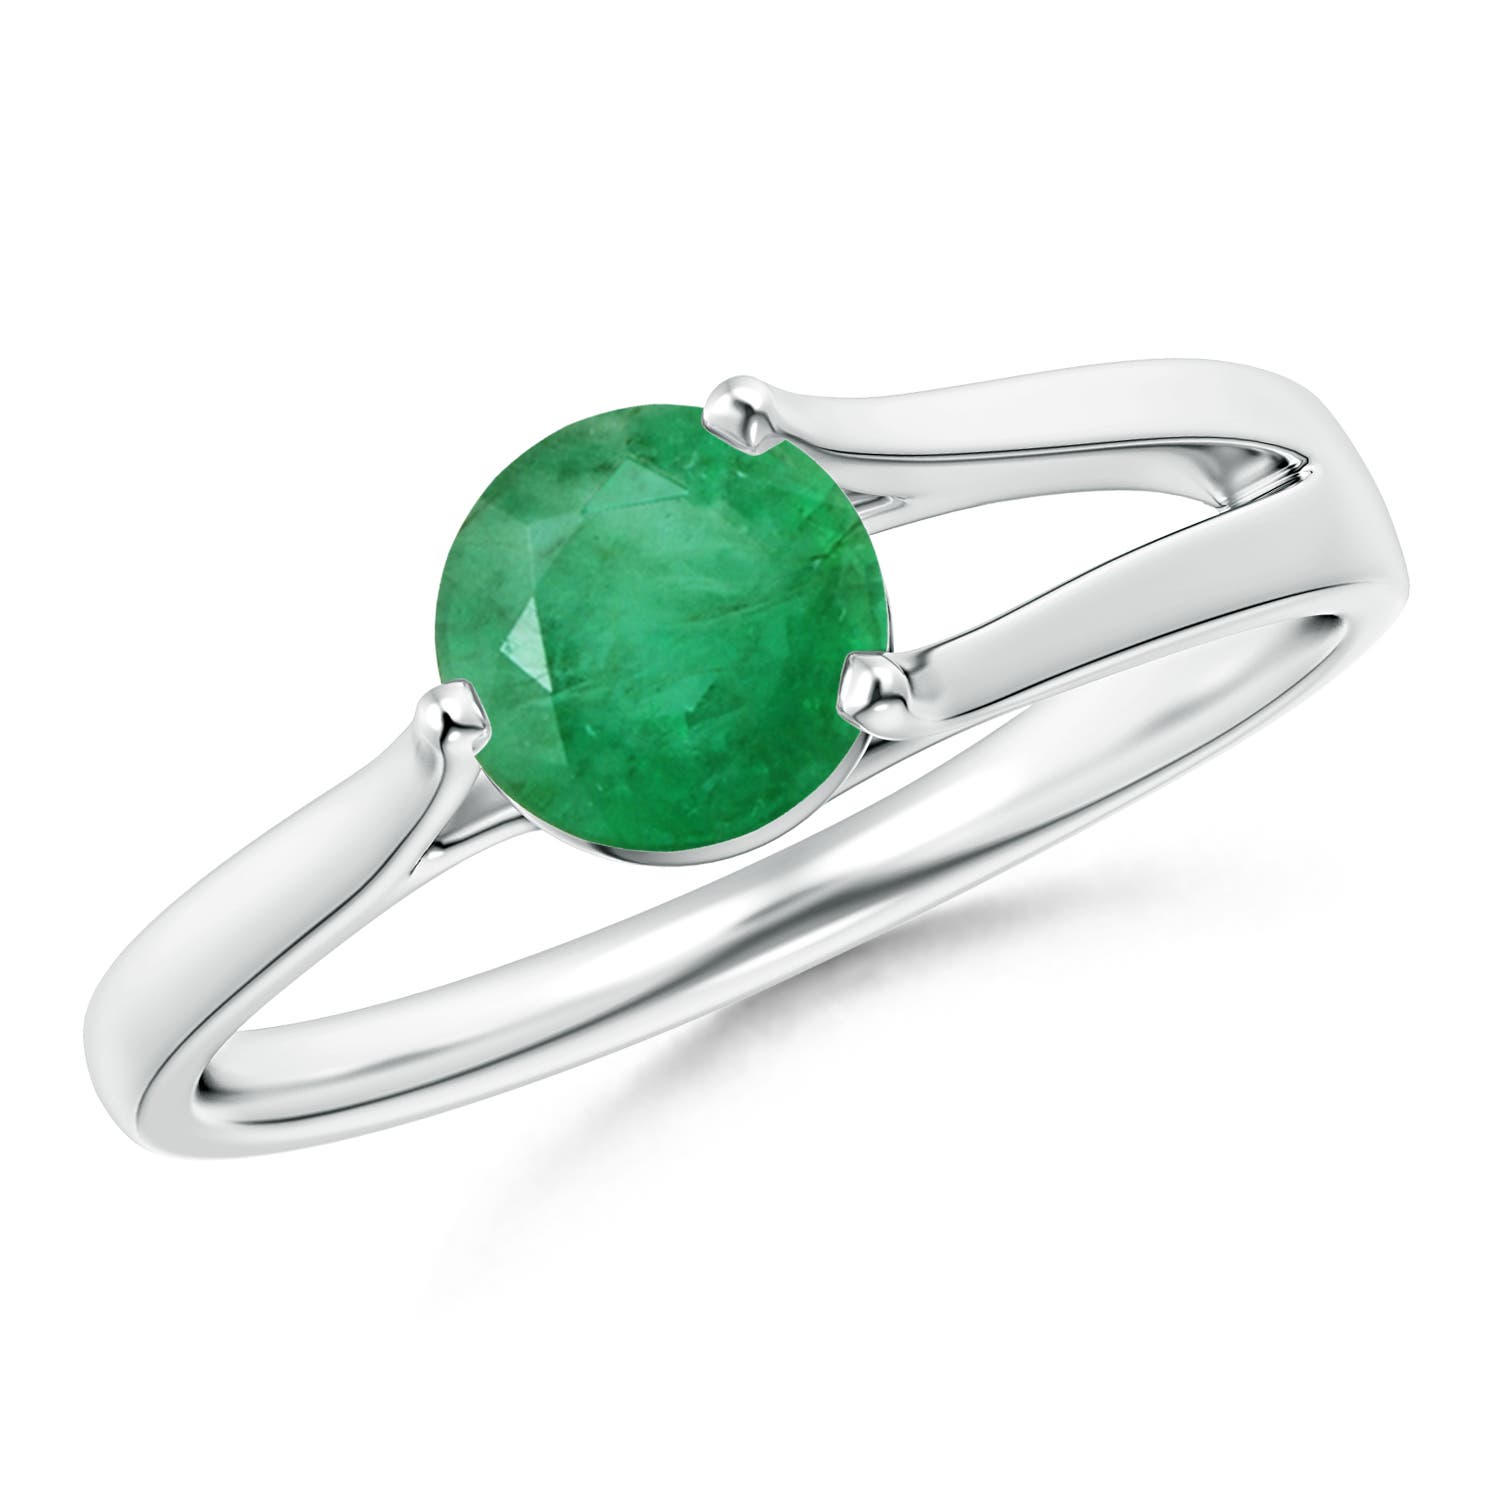 A - Emerald / 0.75 CT / 14 KT White Gold